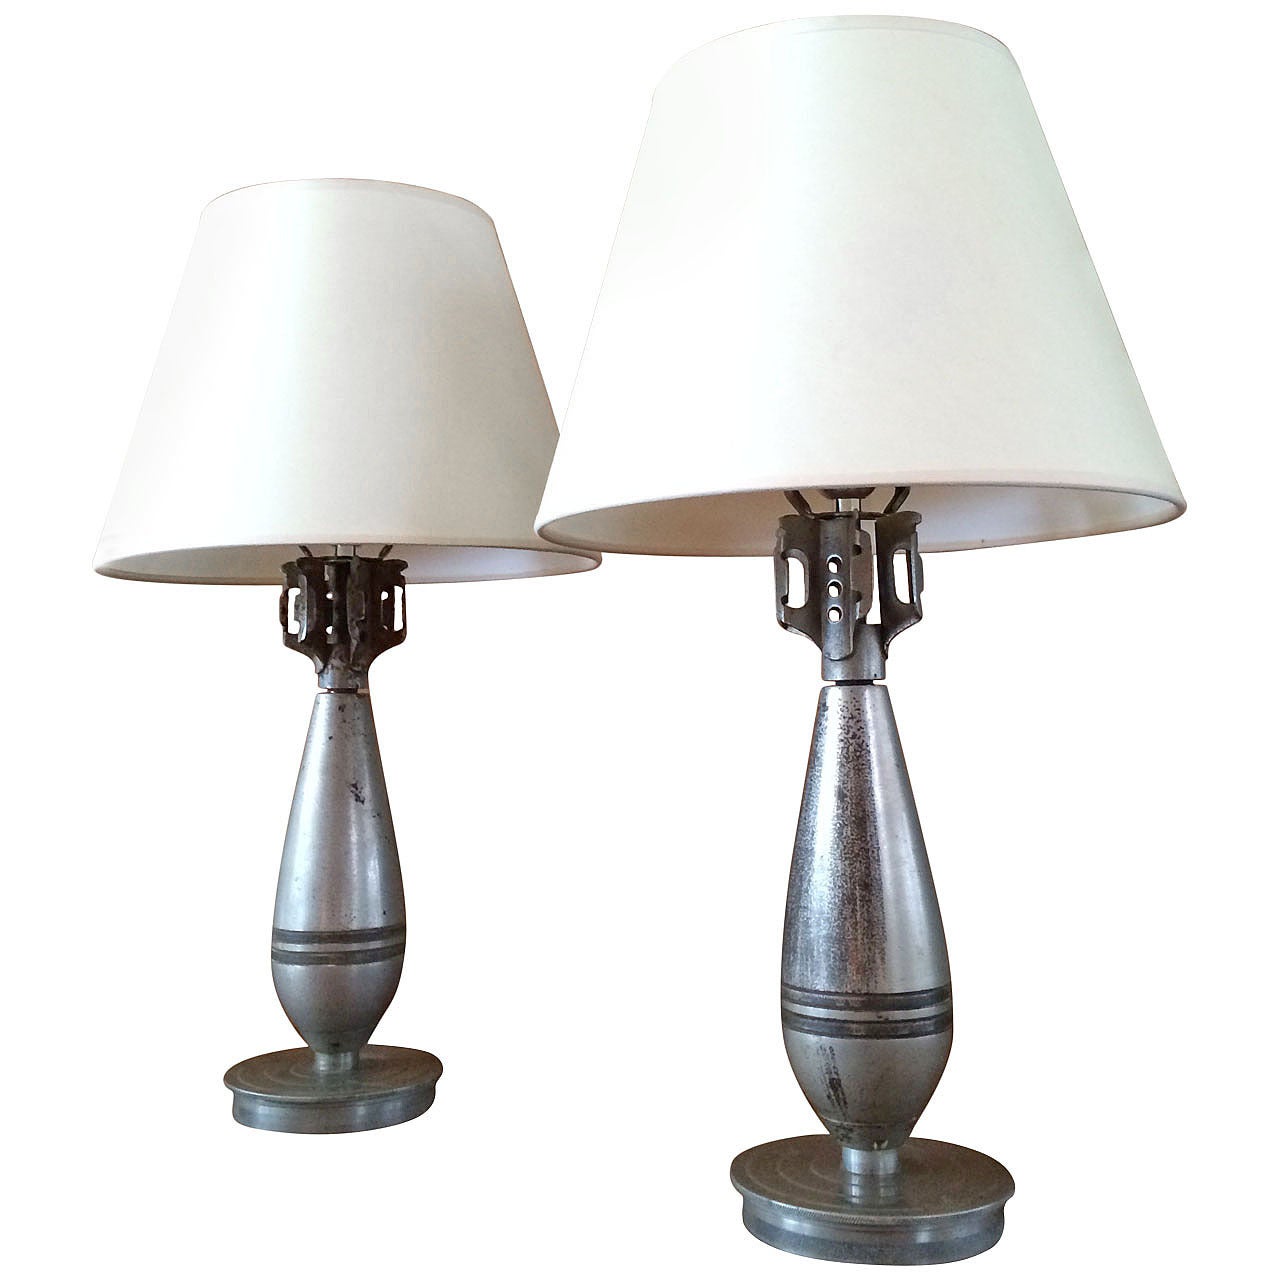 Pair of M43 Bomb Table Lamps, 1940